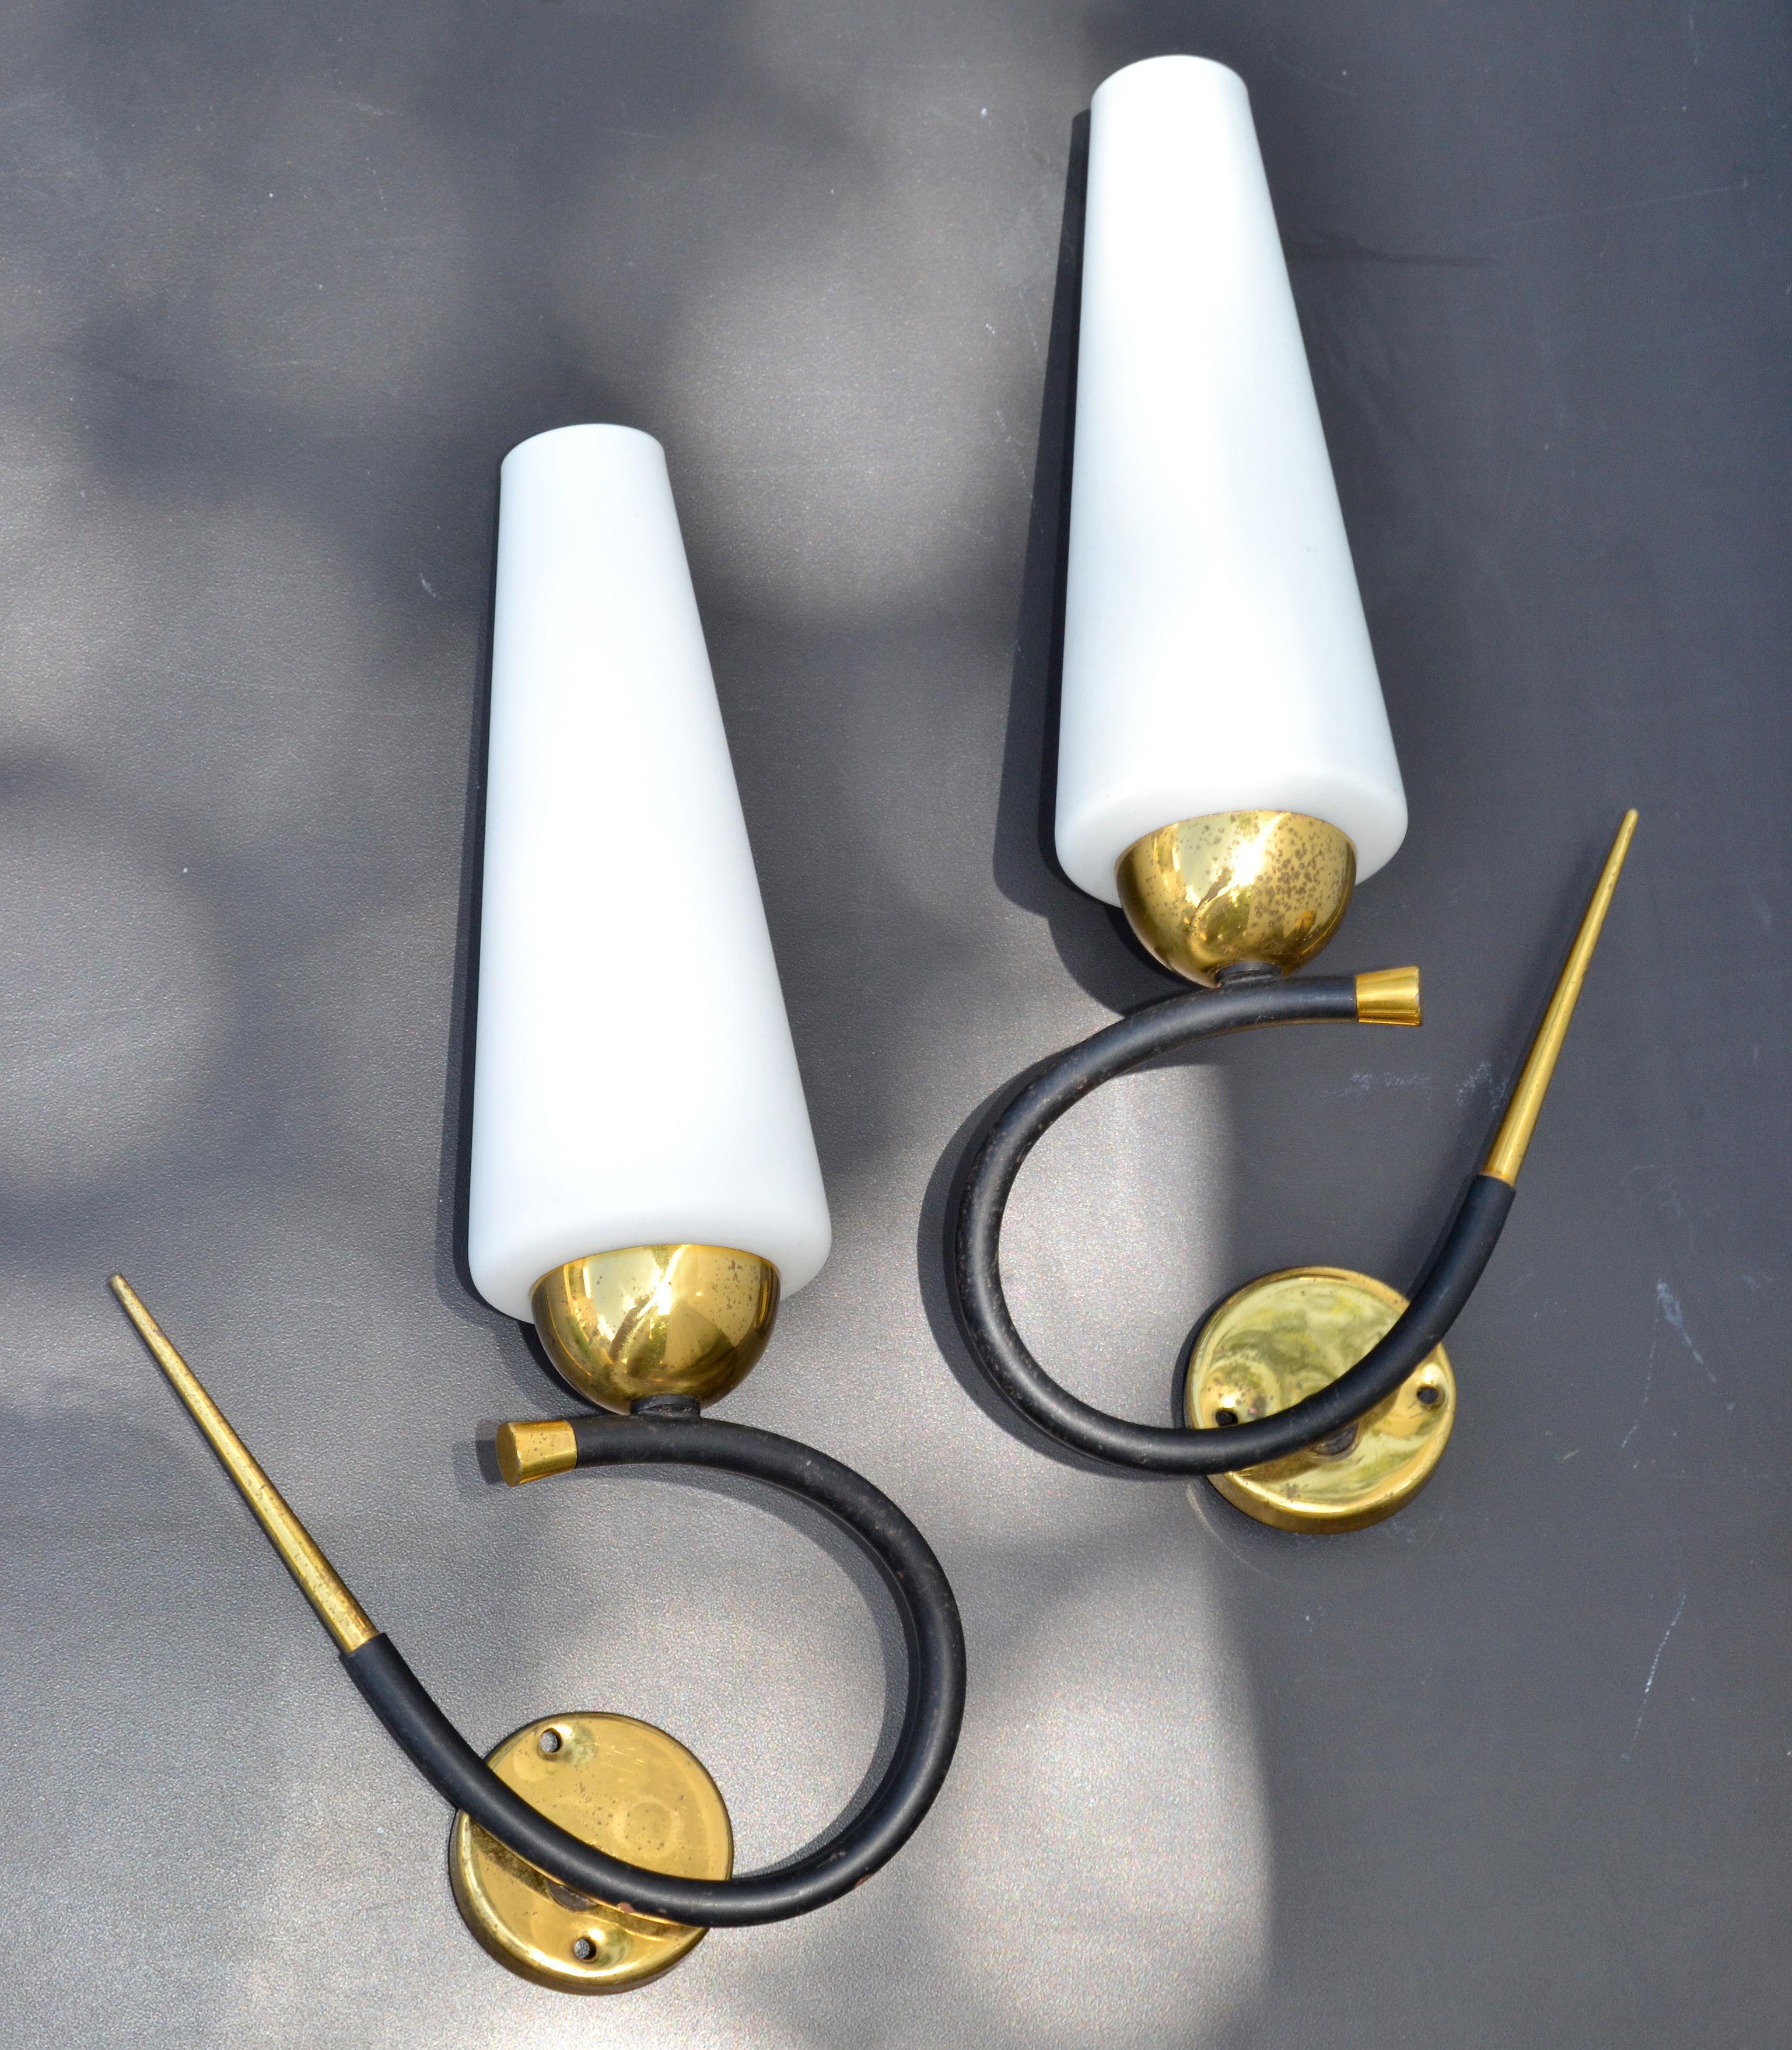 Pair of Maison Lunel sconce, wall light with original cone Opaline shades, made out of Black finish wrought iron and brass details.
Both are the same size and mirror image of each other, superb French Design from the 1960s.
Each Sconces takes 1